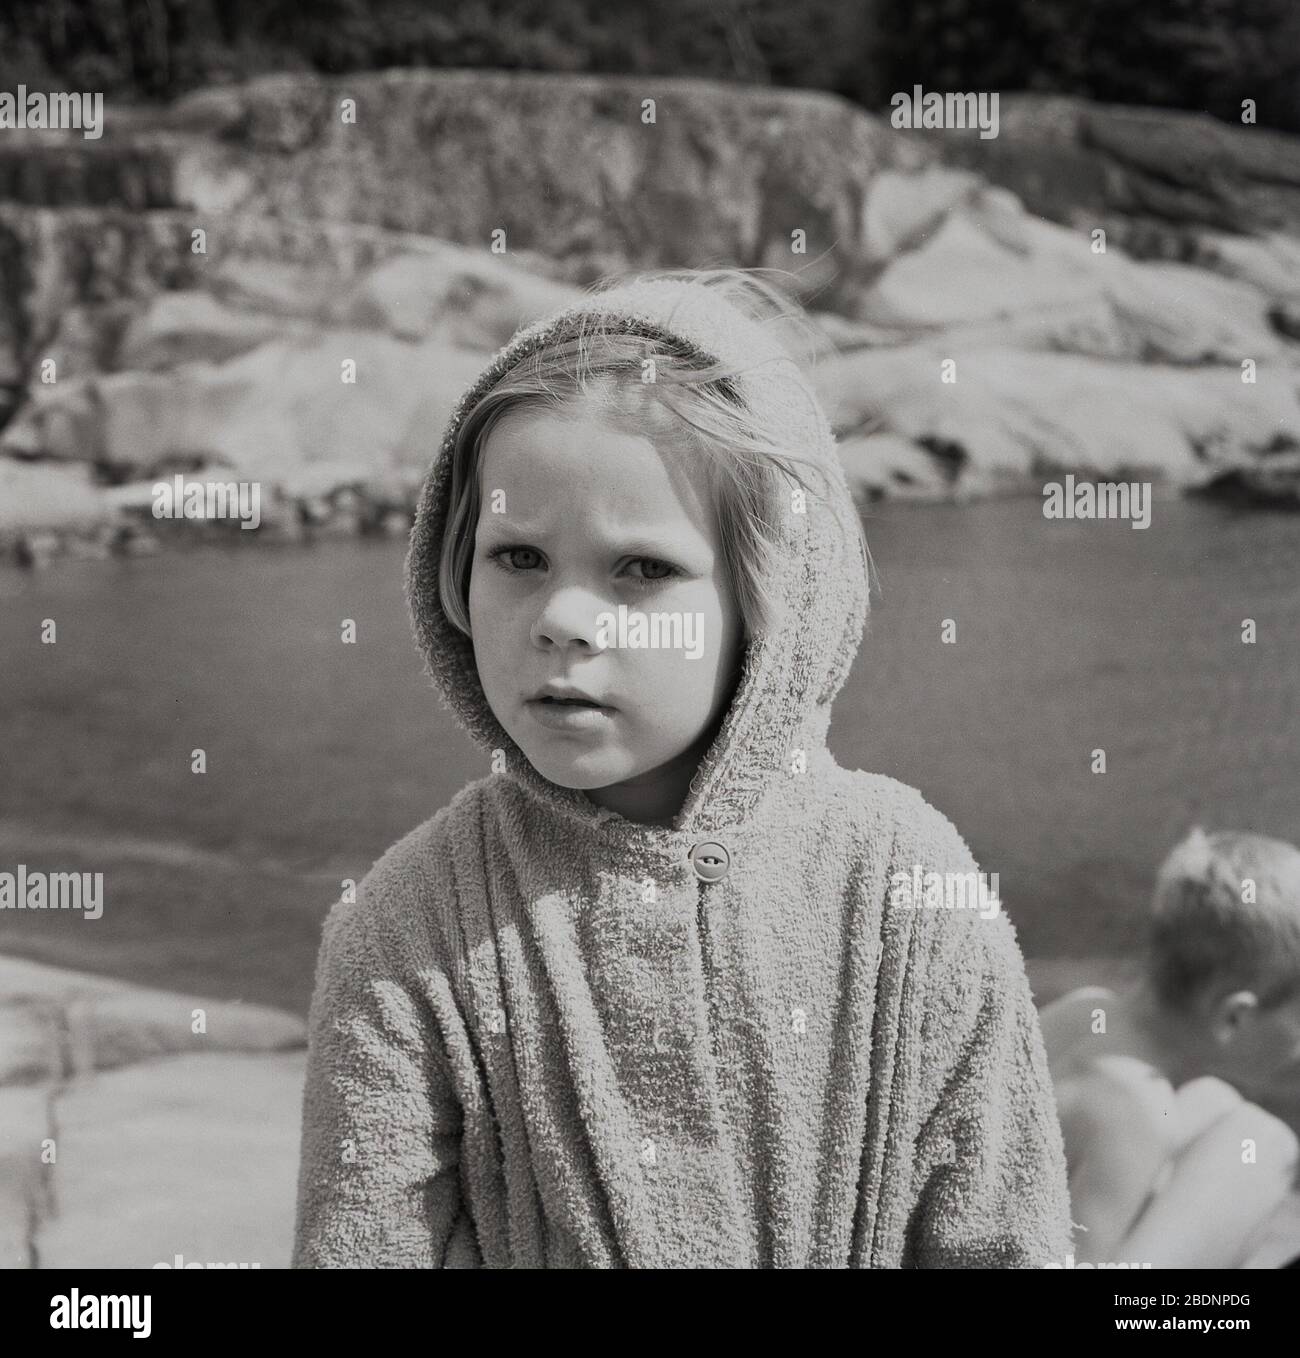 1960s, historical, young girl wearing a cotton top or poncho with hood, a popular toweling garment worn by youngsters in this era after swimming. Stock Photo